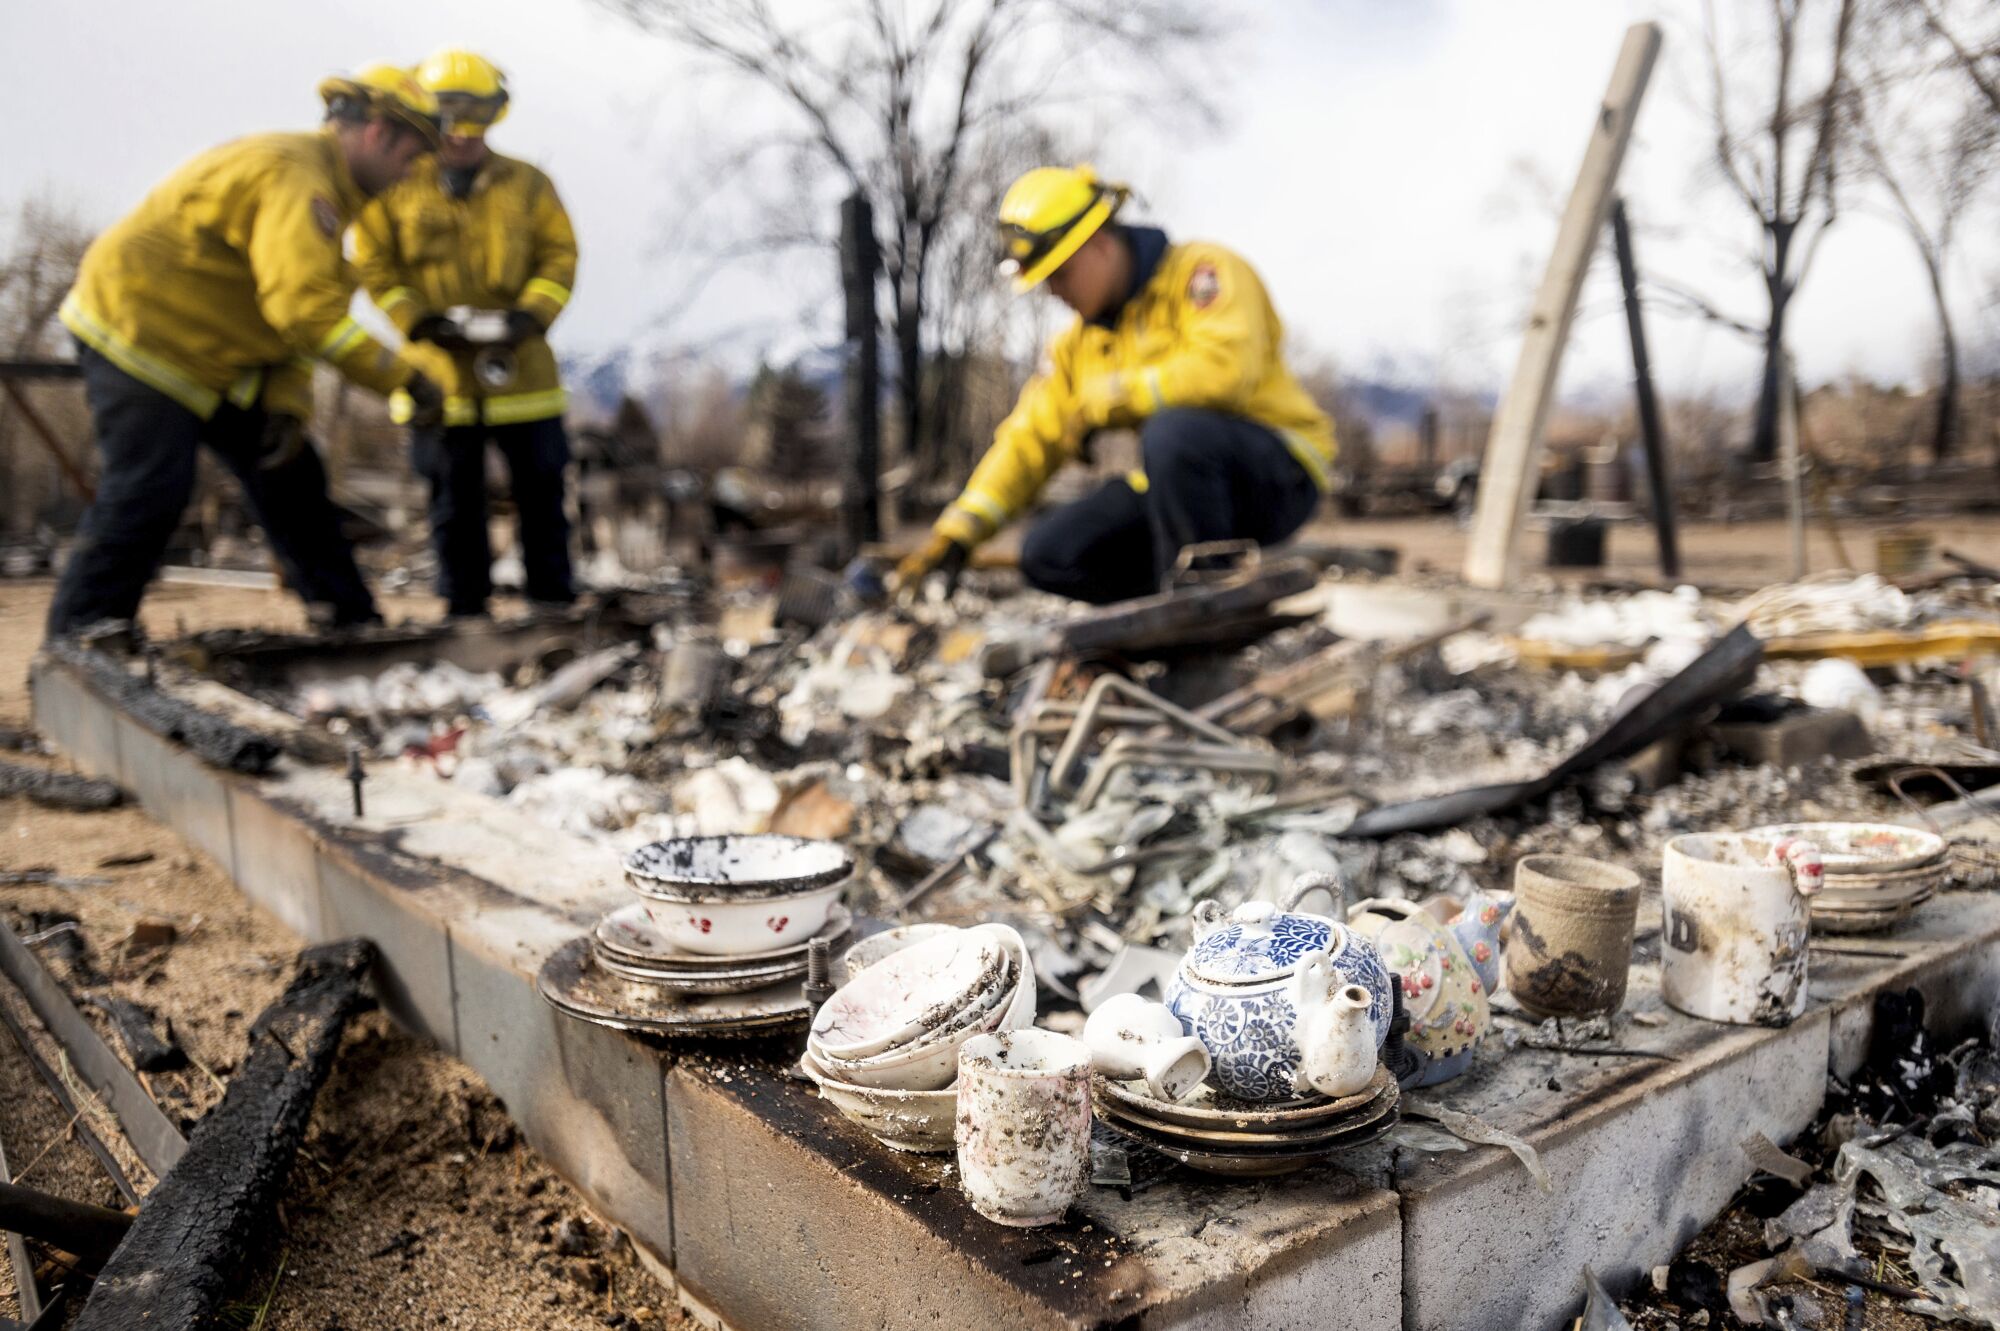 Small bowls, plates and a tea pot sit on the edge of the burned ruins of a home as firefighters look at the wreckage